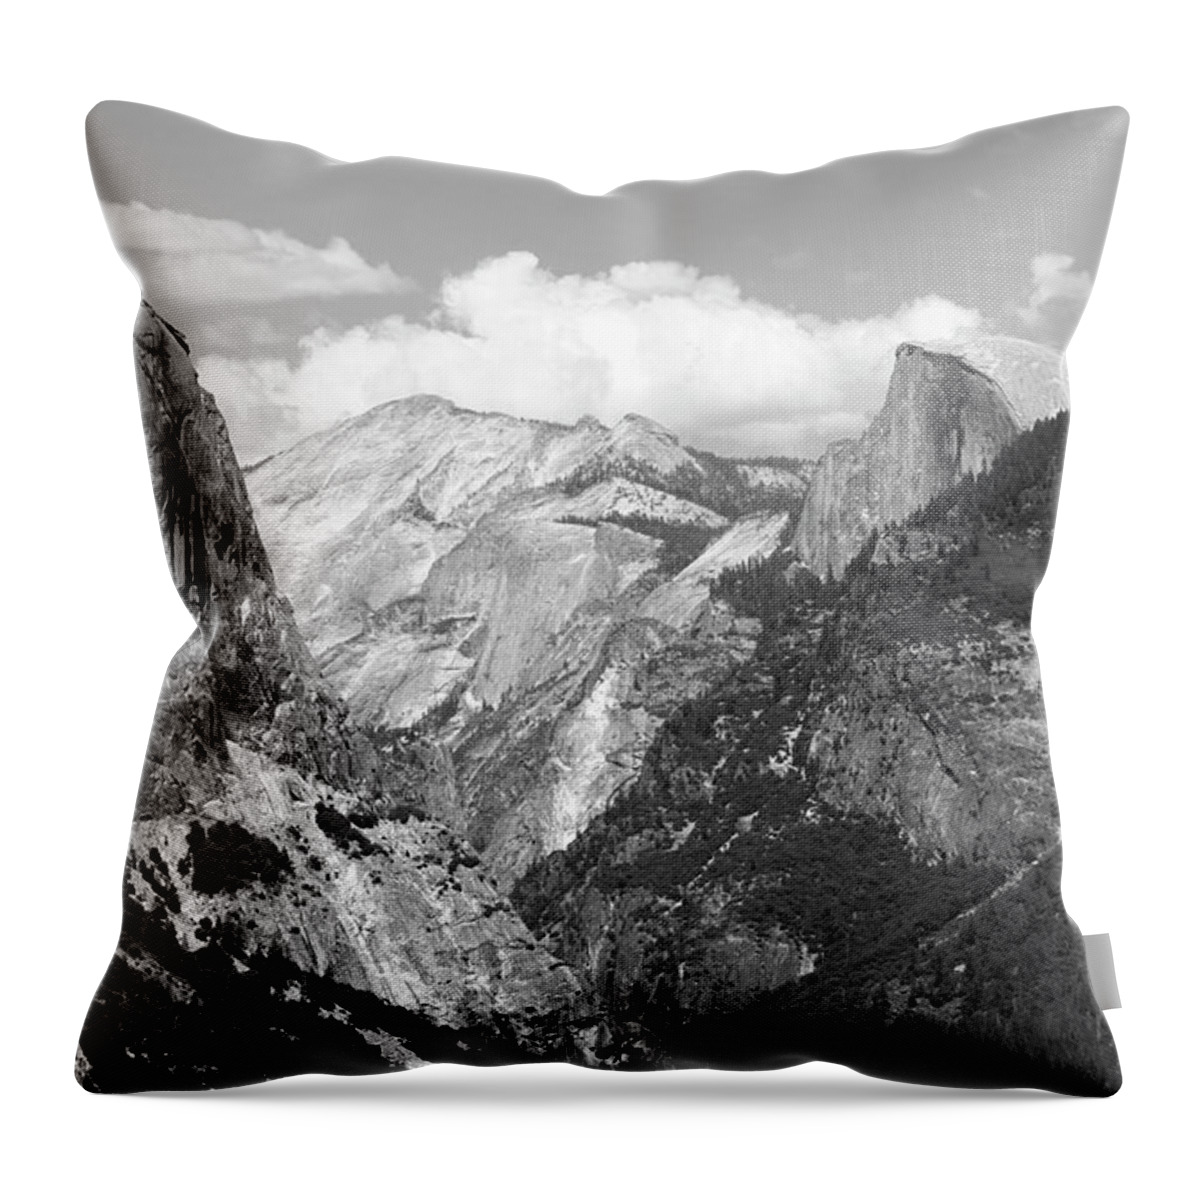 Scenics Throw Pillow featuring the photograph Yosemite National Park by Art Wager